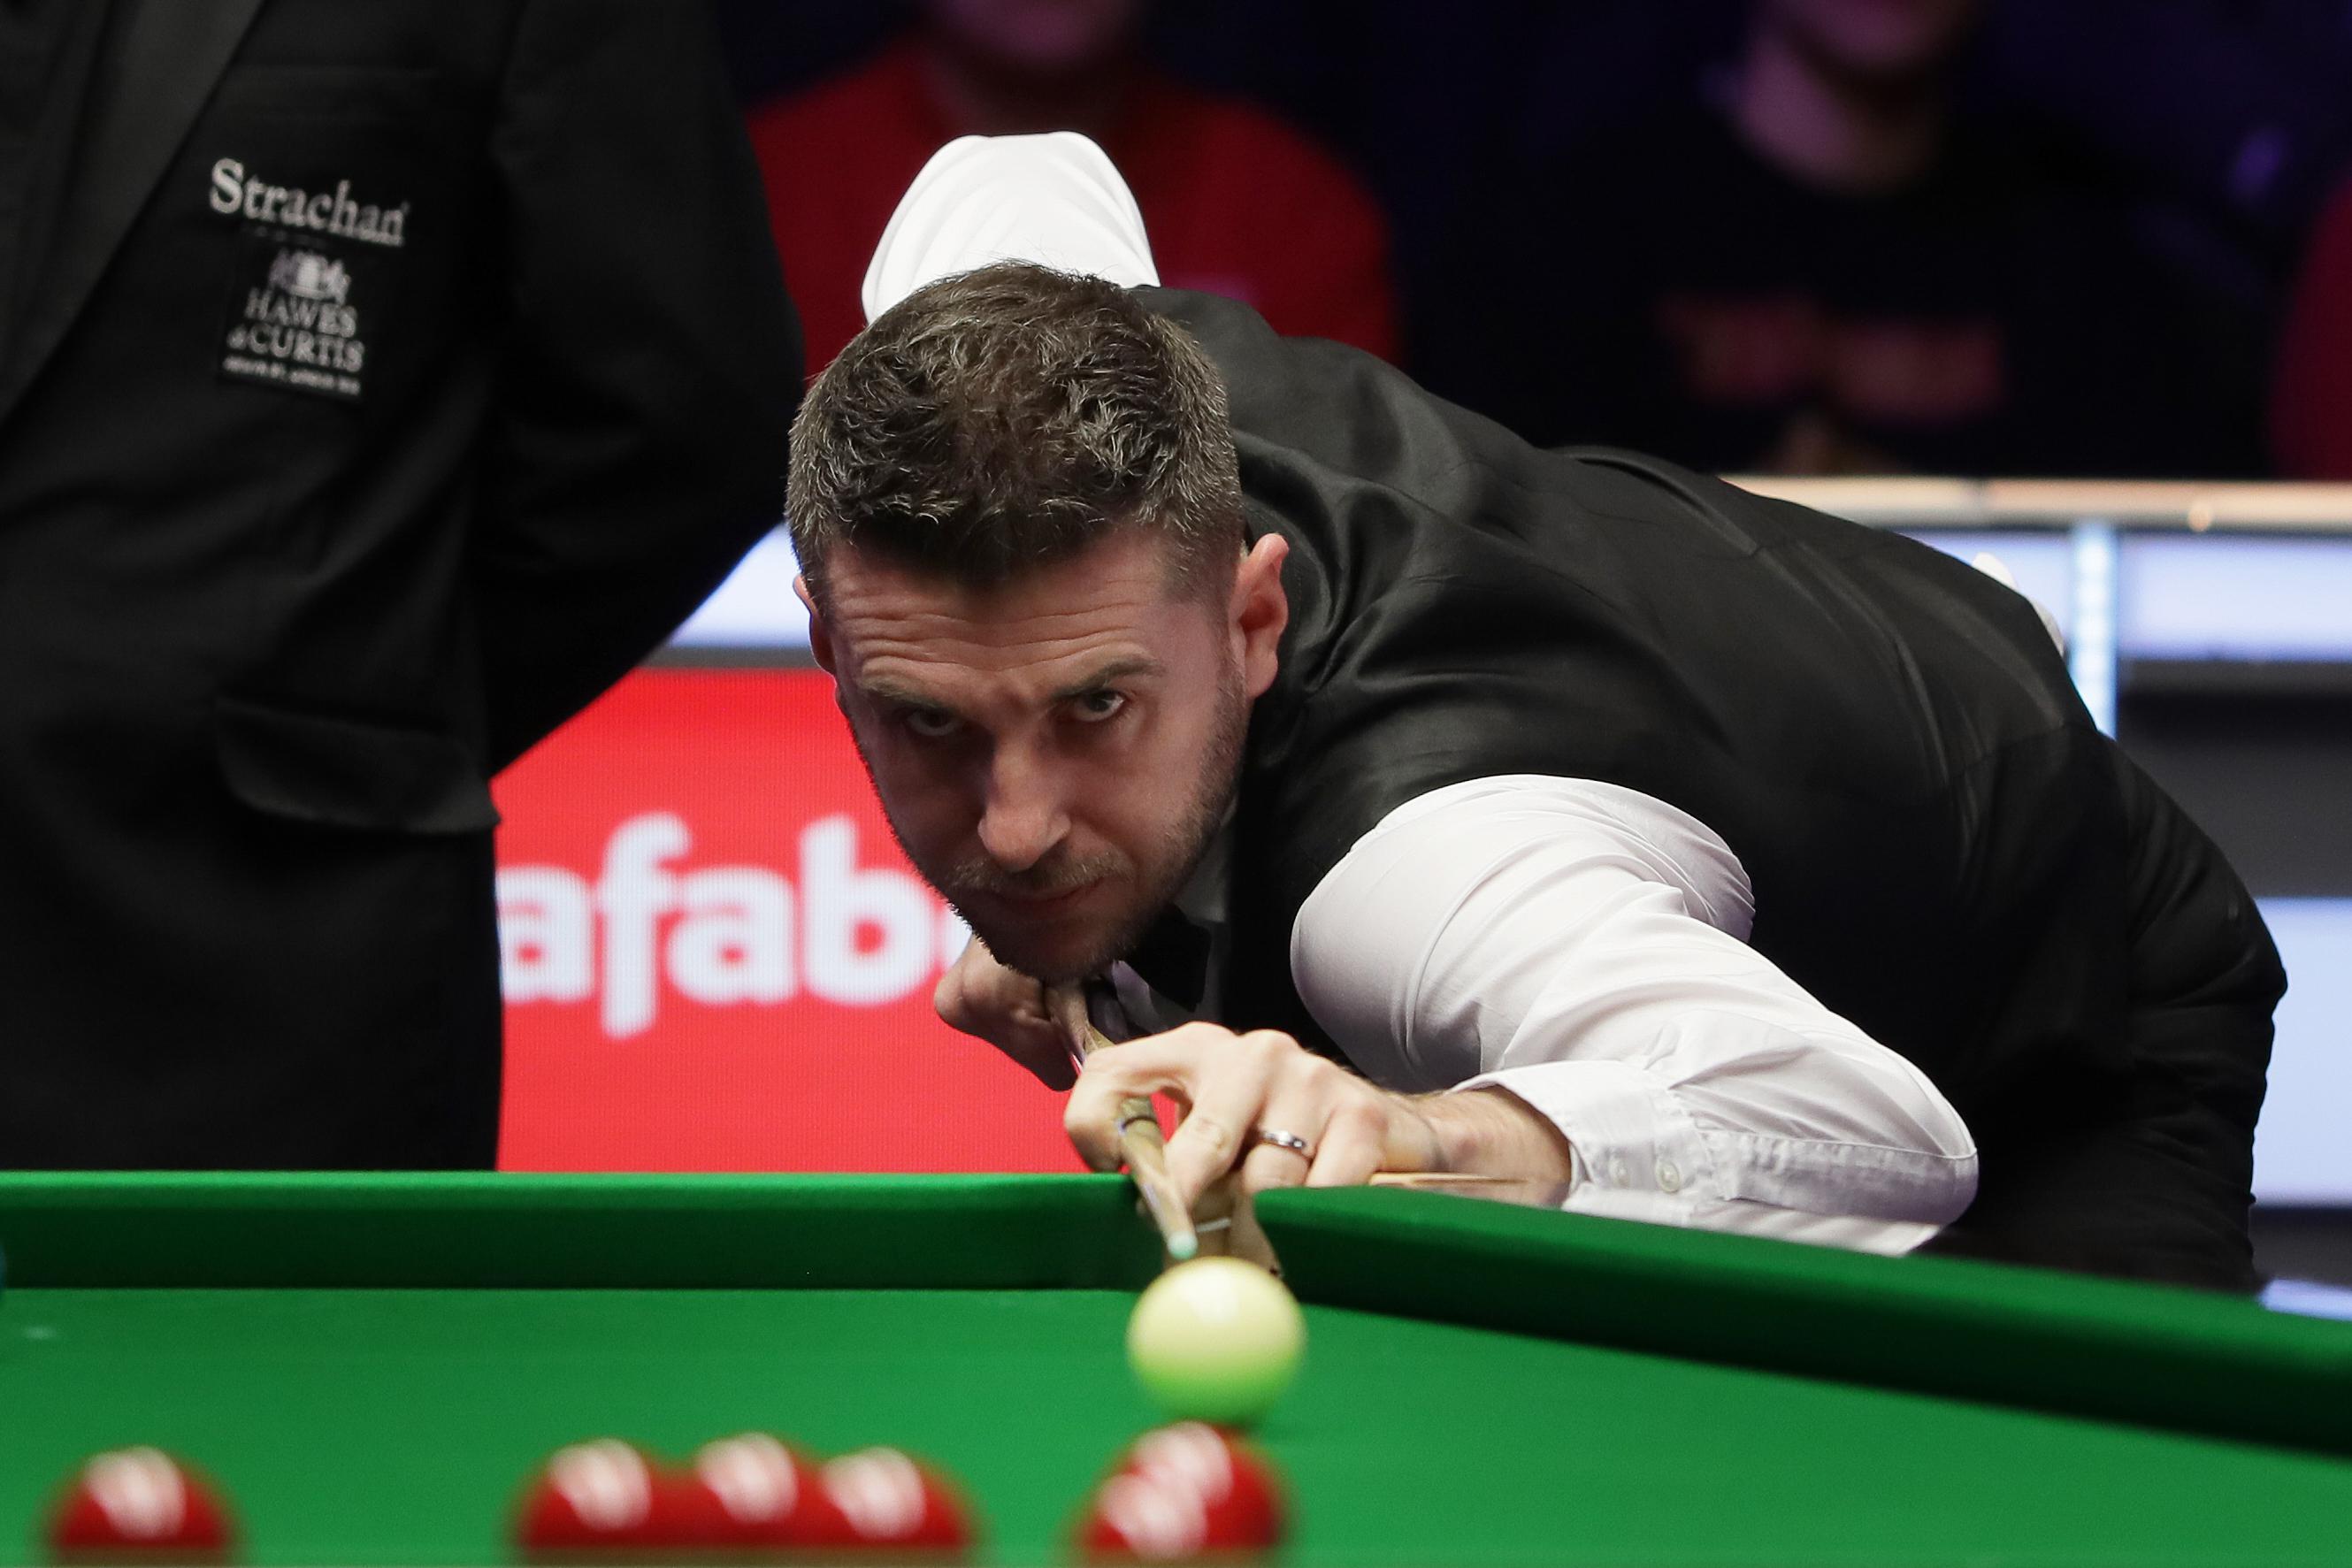 Defending champion Selby beats Chinese teenager Fan at Snooker English Open 